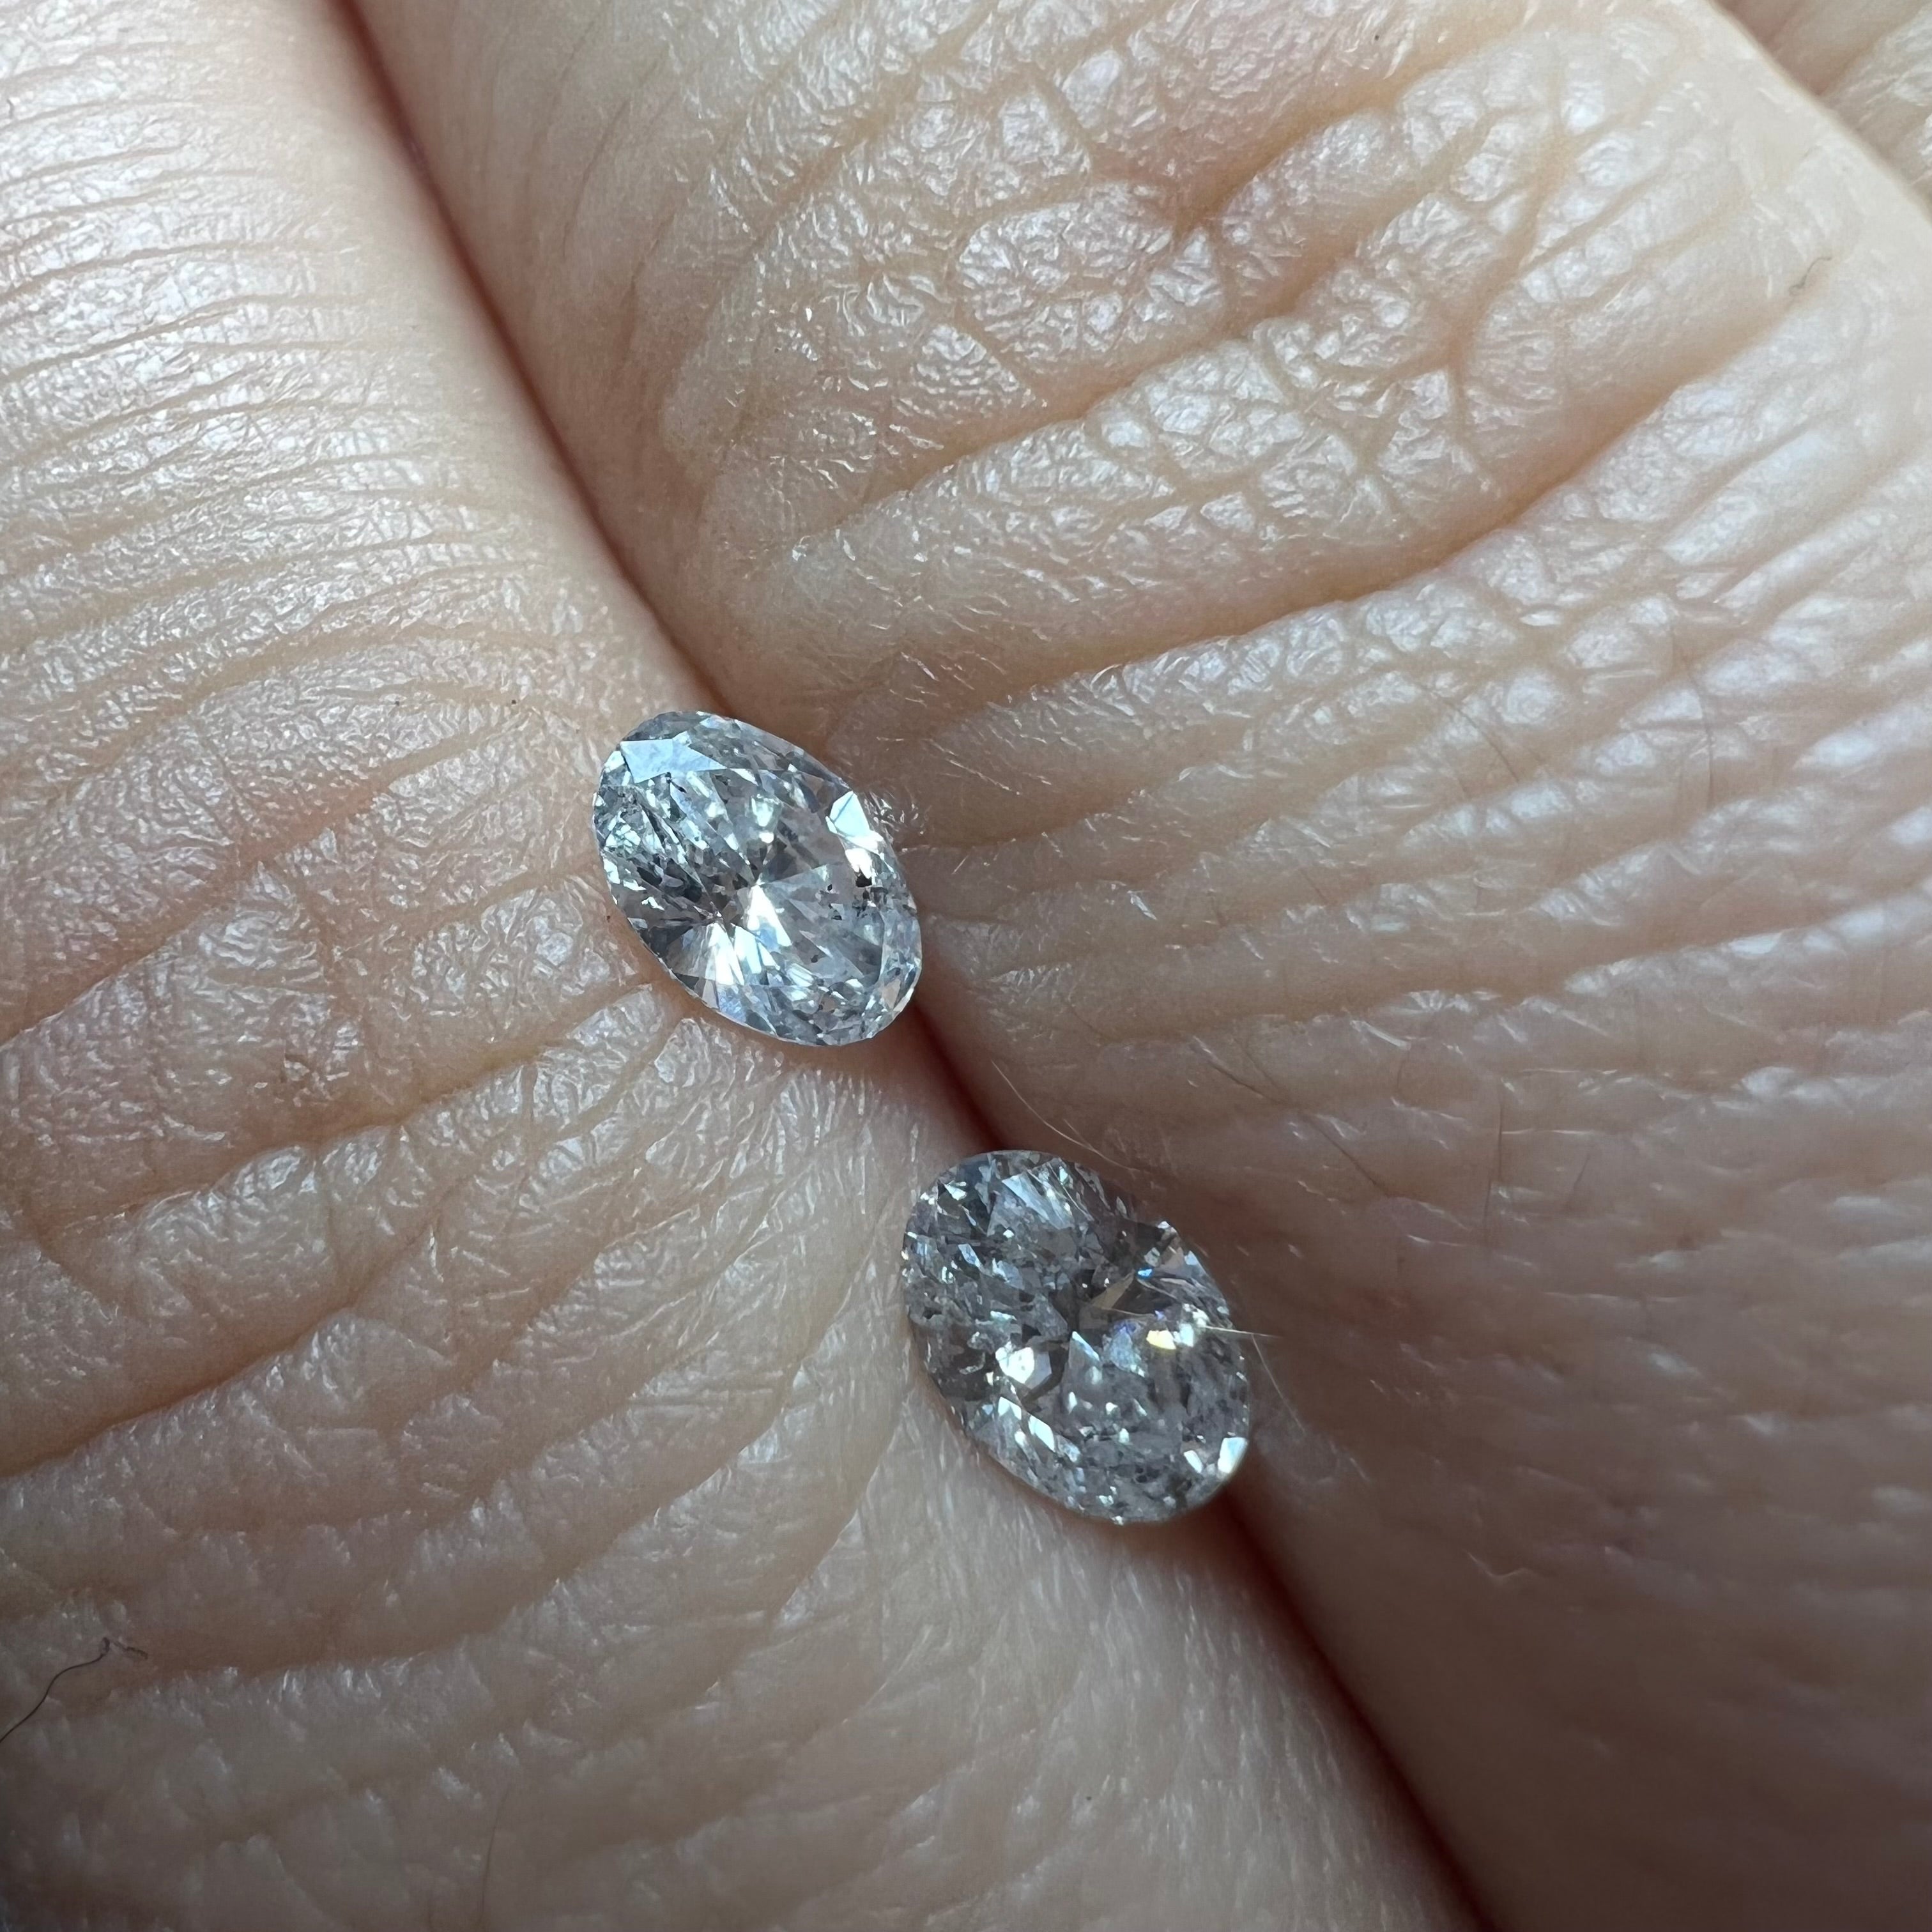 .76CTW Pair of Natural Oval Cut Diamonds I1 H-J Natural and Earth mined